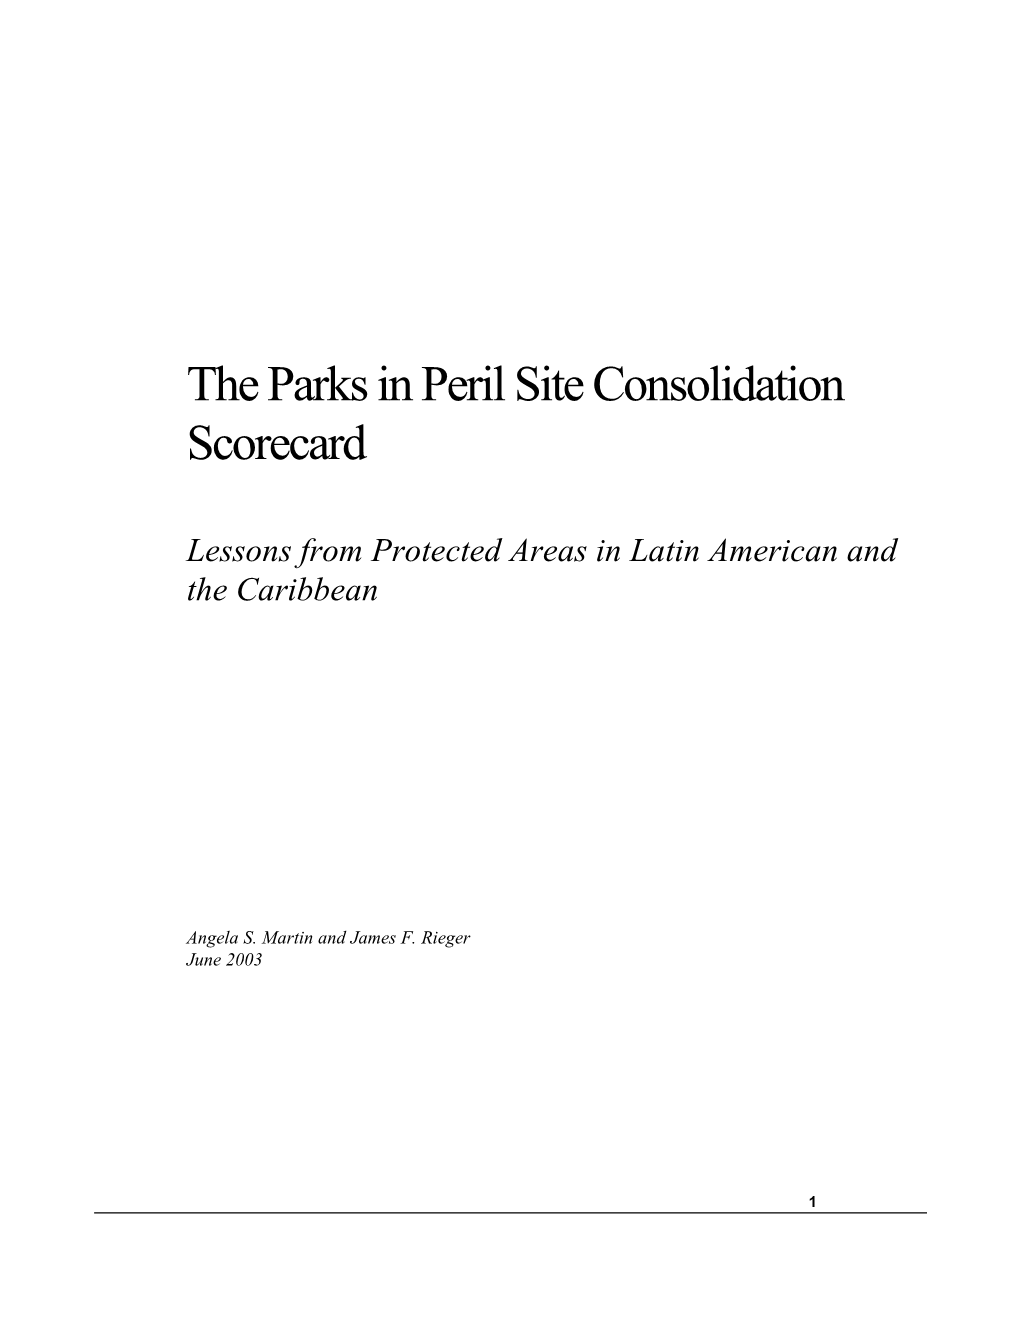 The Parks in Peril Site Consolidation Scorecard